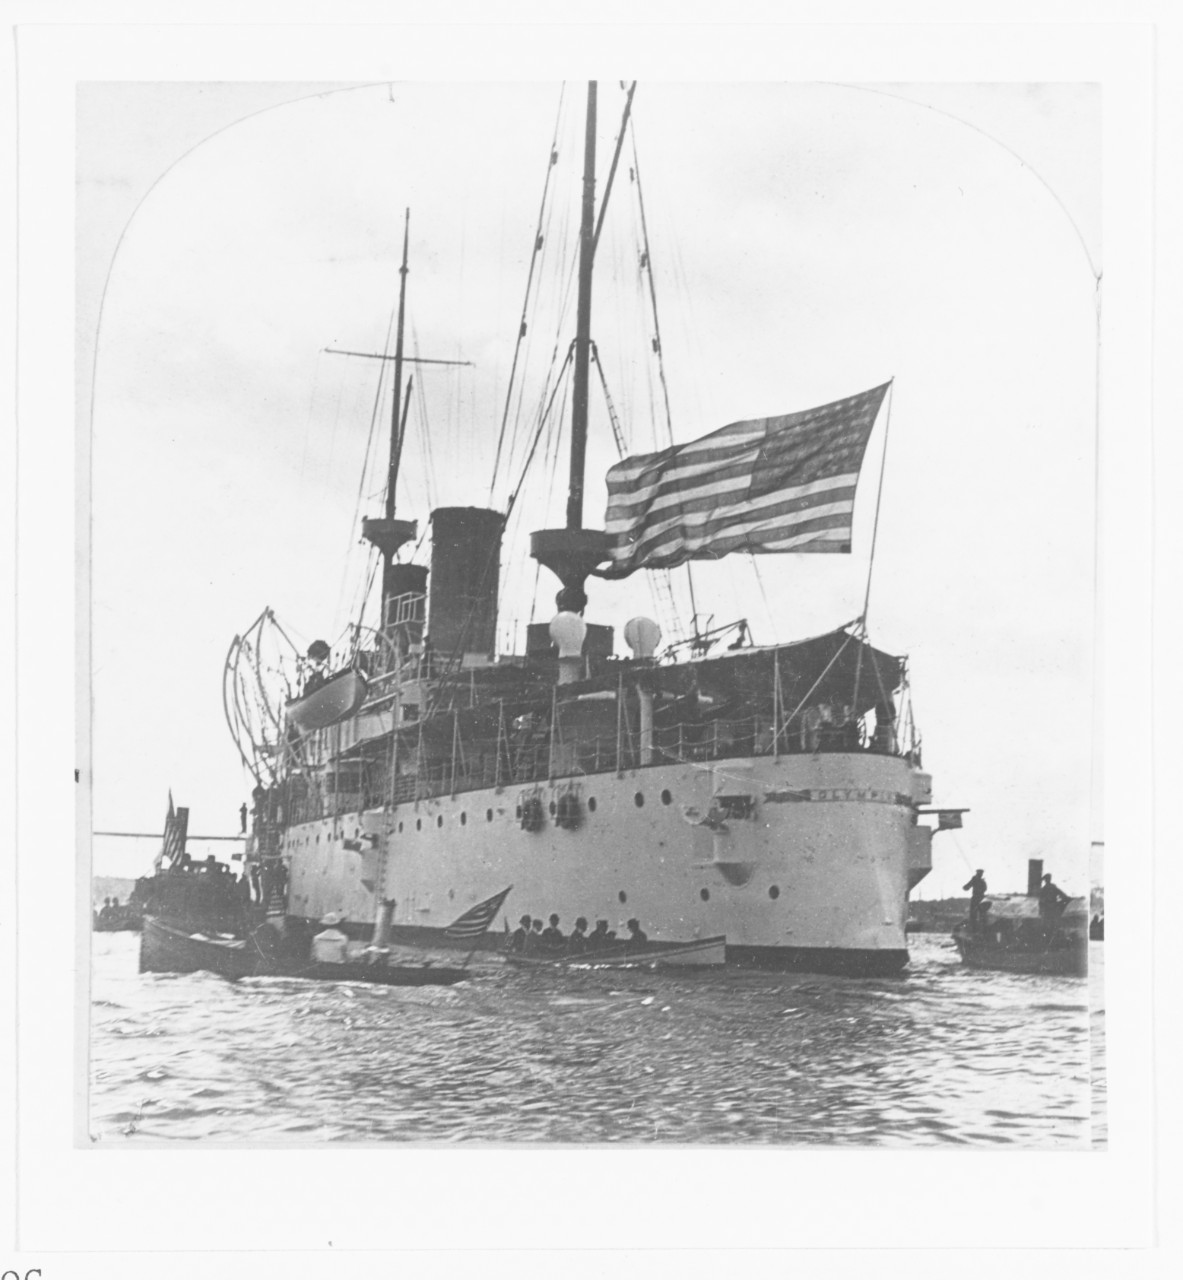 Photo #: NH 100316  USS Olympia (C-6)A stereo pair version of this image is available as